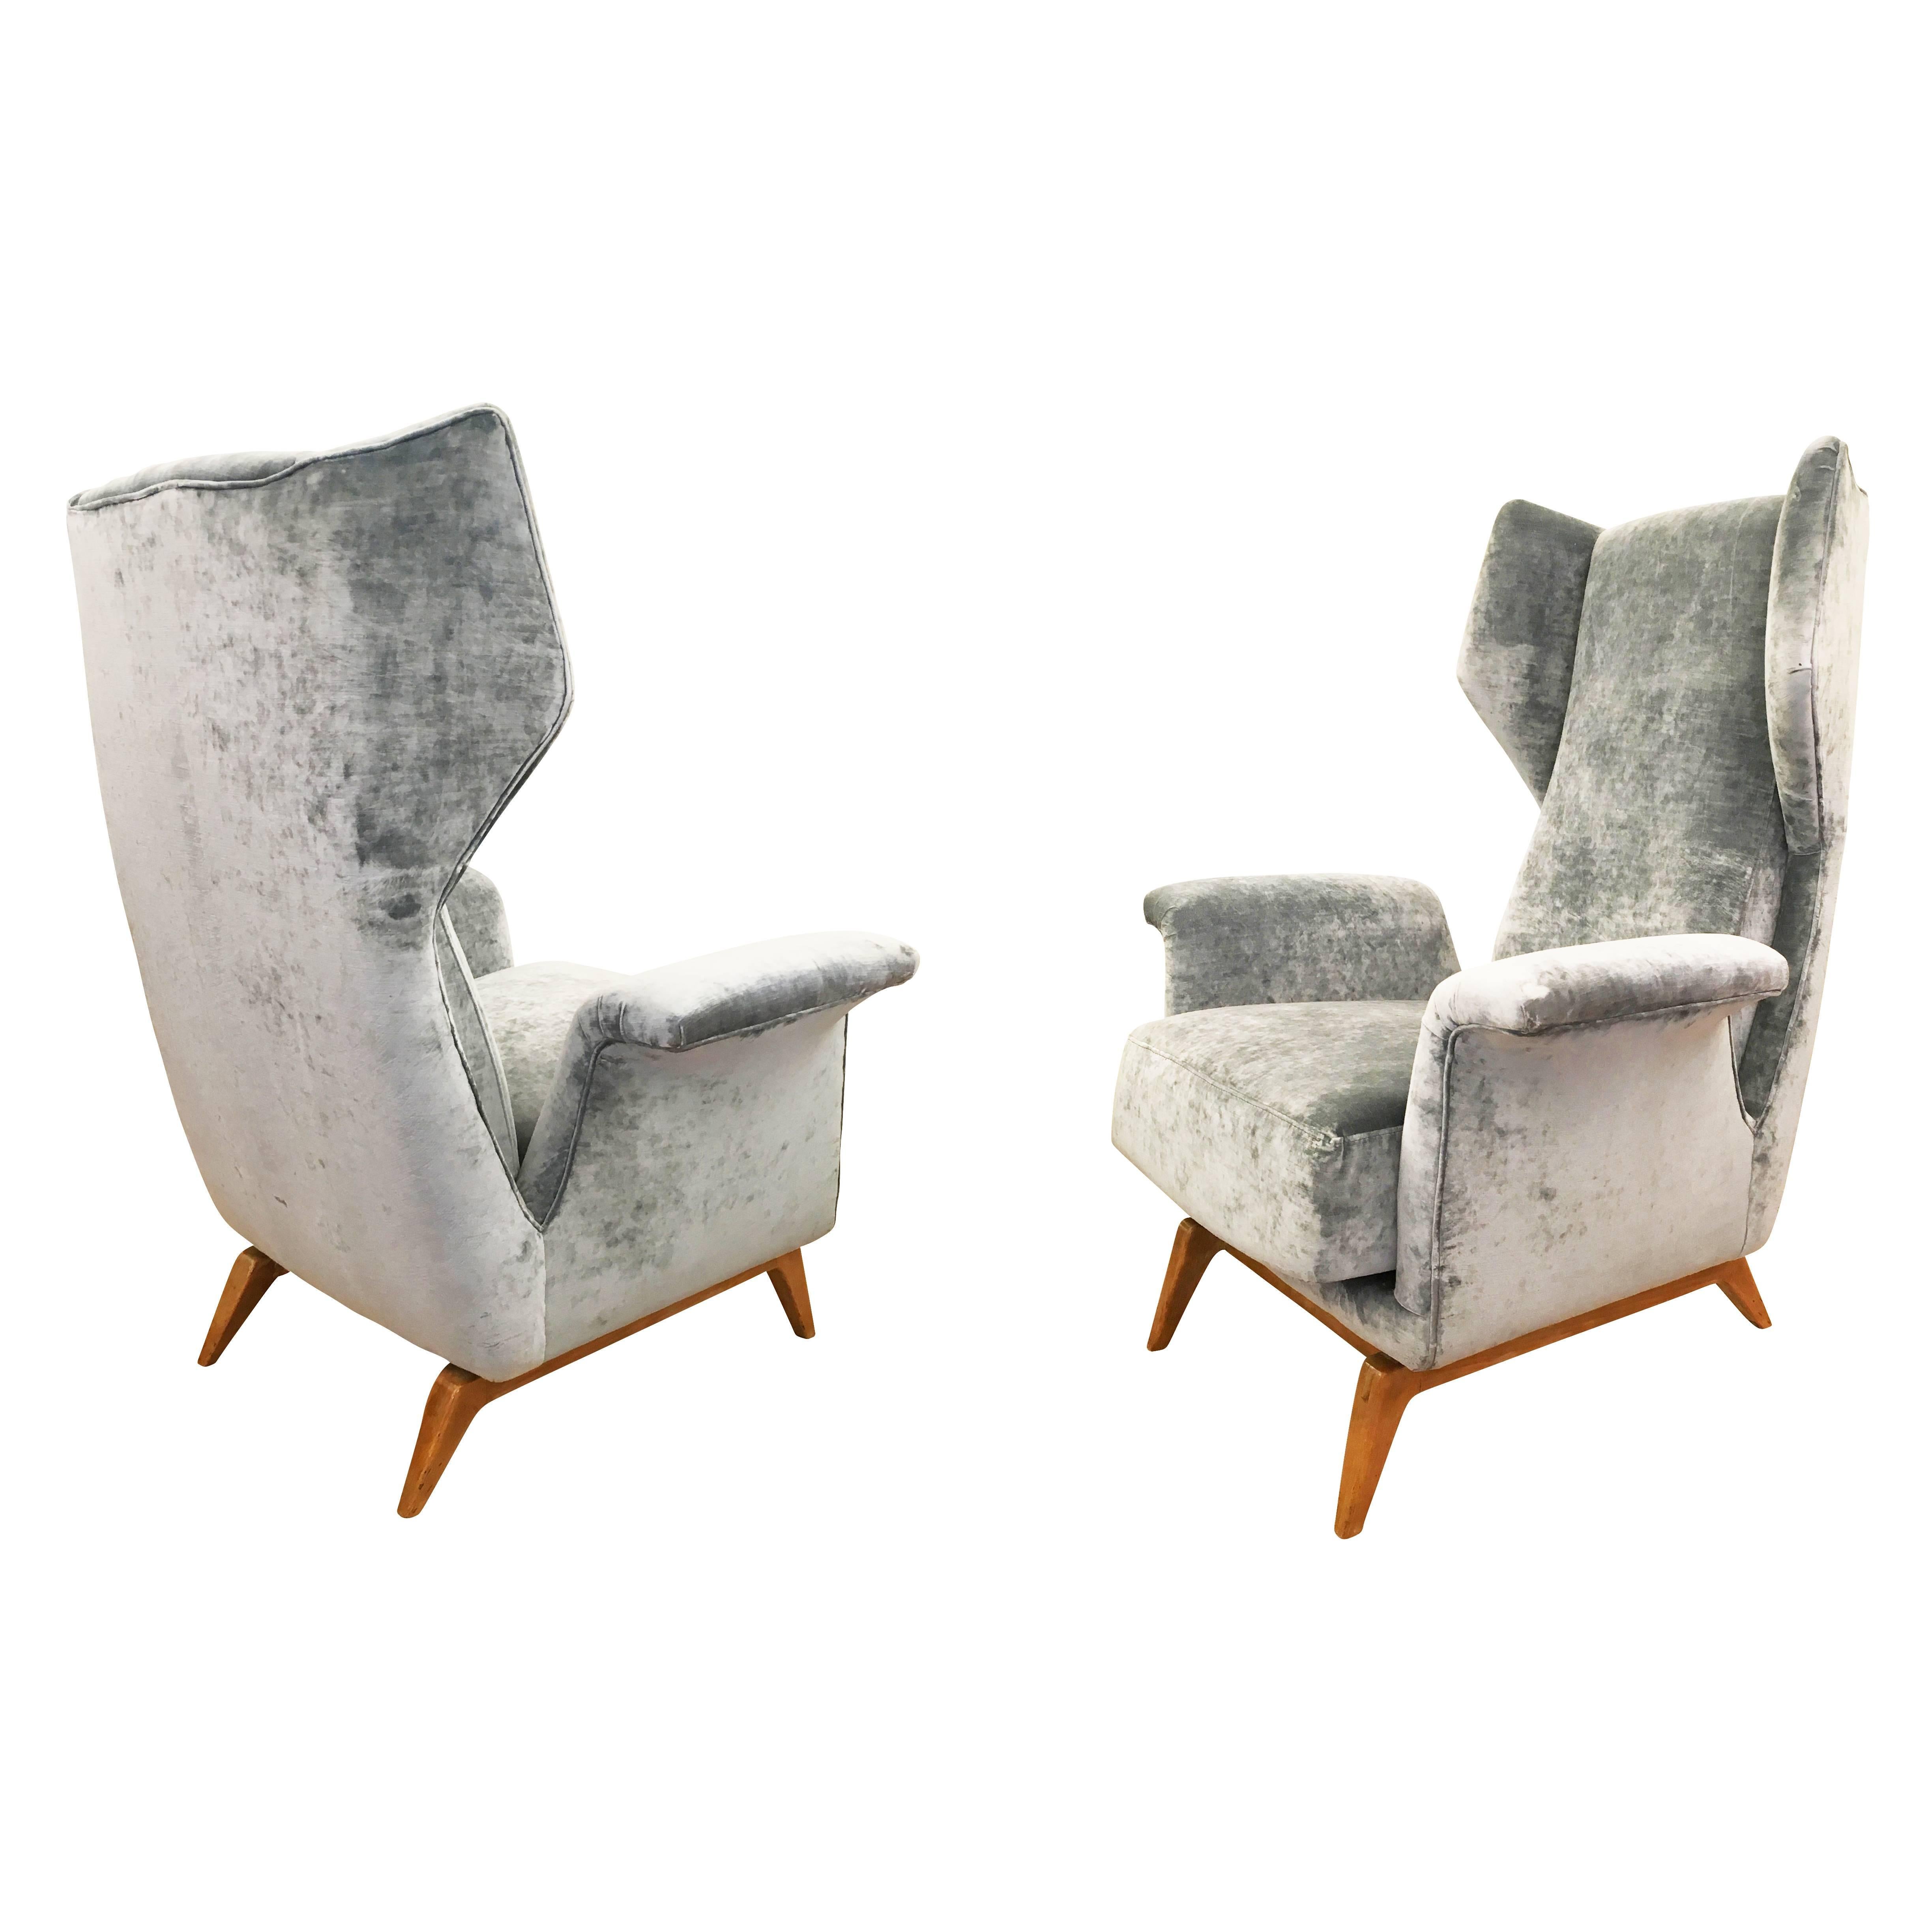 Pair of Cassina Lounge Chairs, Italy, 1960s